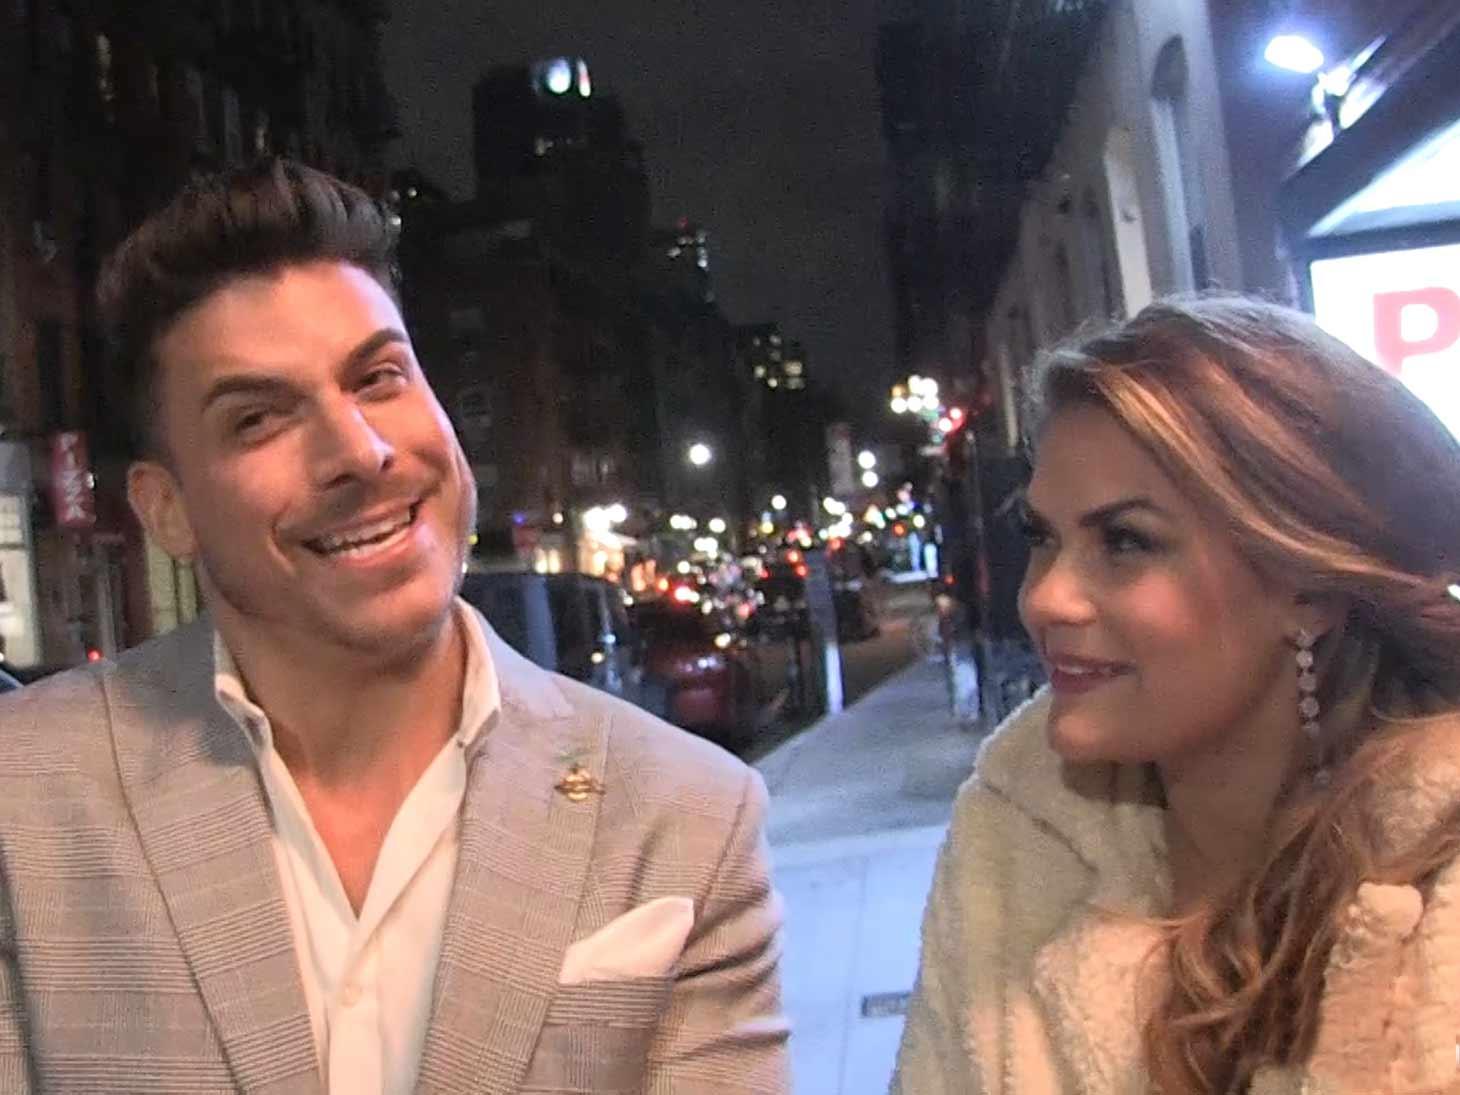 ‘Vanderpump Rules’ Stars Jax Taylor and Brittany Cartwright Will ‘Probably’ Televise Their Wedding